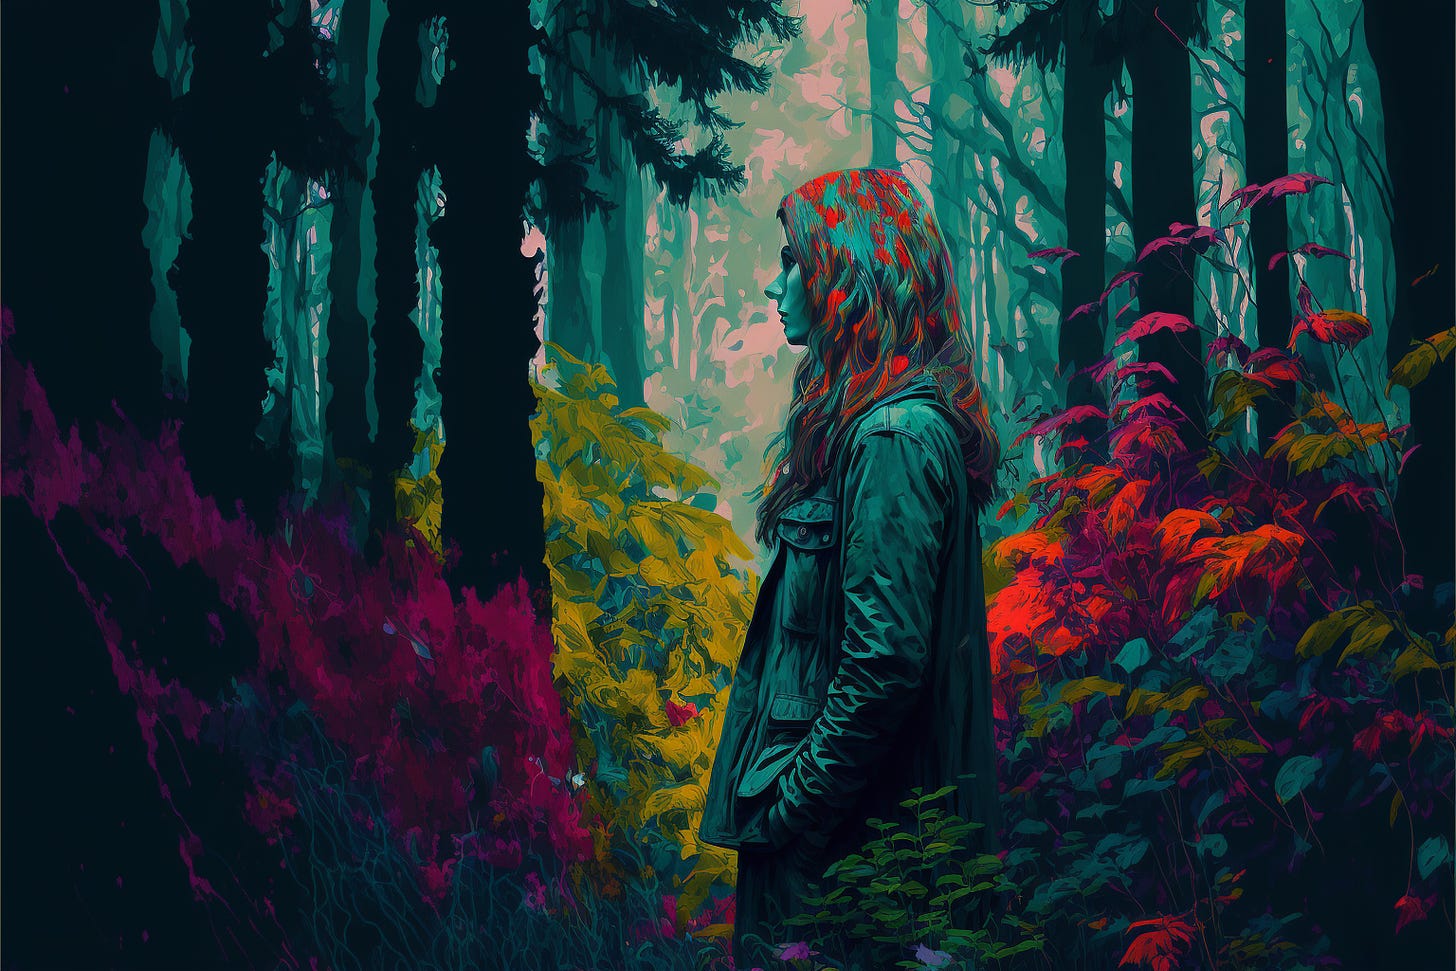 AI-generated image of woman with red hair standing in a dense forest with colorful shrubs around her